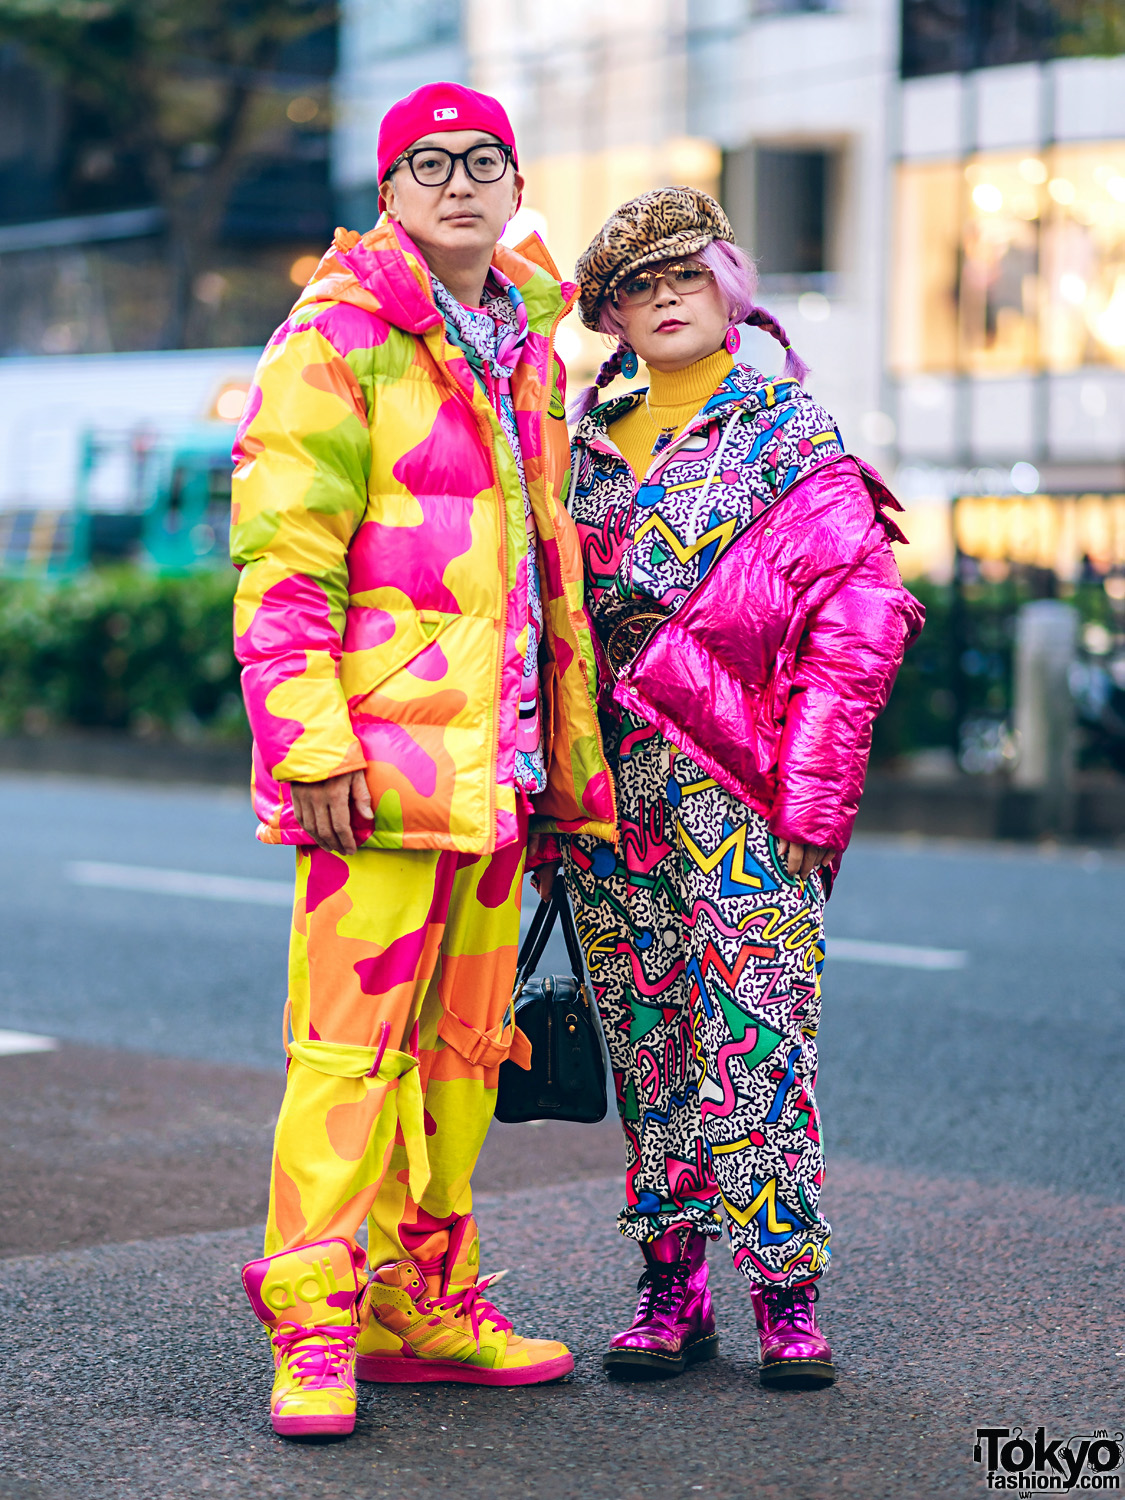 Harajuku Duo in Colorful Winter Street Styles Adidas x Jeremy Scott Print, Puffer Jacket, Dr. Martens Metallic Boots, Galaxxxy Hoodie, Nuezzz Jumpsuit & MCM Bag – Tokyo Fashion